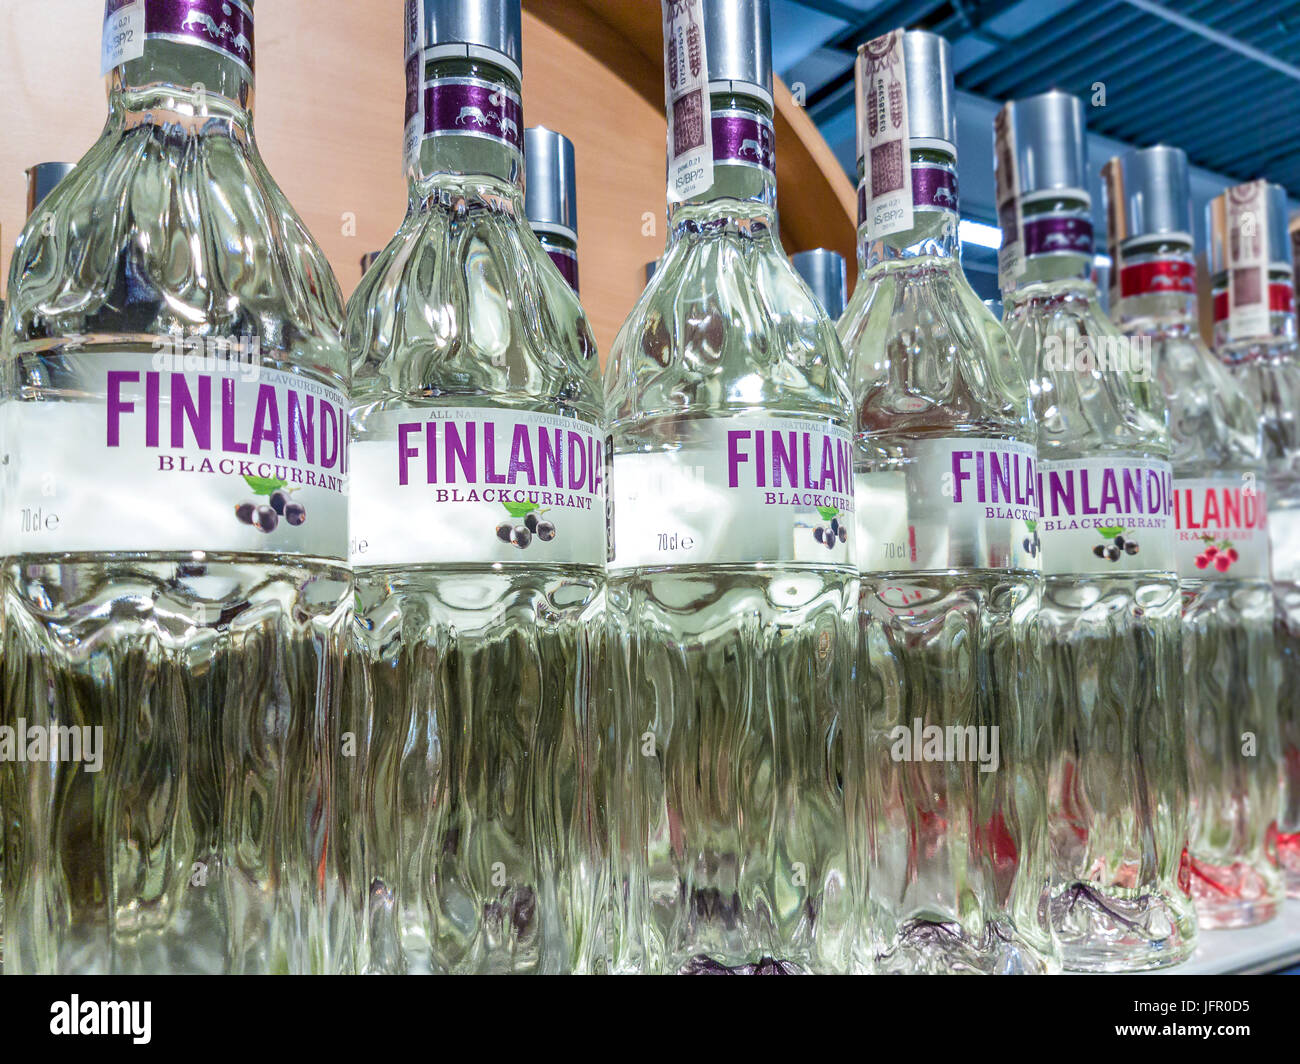 Gorlice, Poland - June 23, 2017: Variety of Natural Flavoured Finlandia Vodka on store shelves for sale in Kaufland Hypermarket. Finlandia is a famous Stock Photo